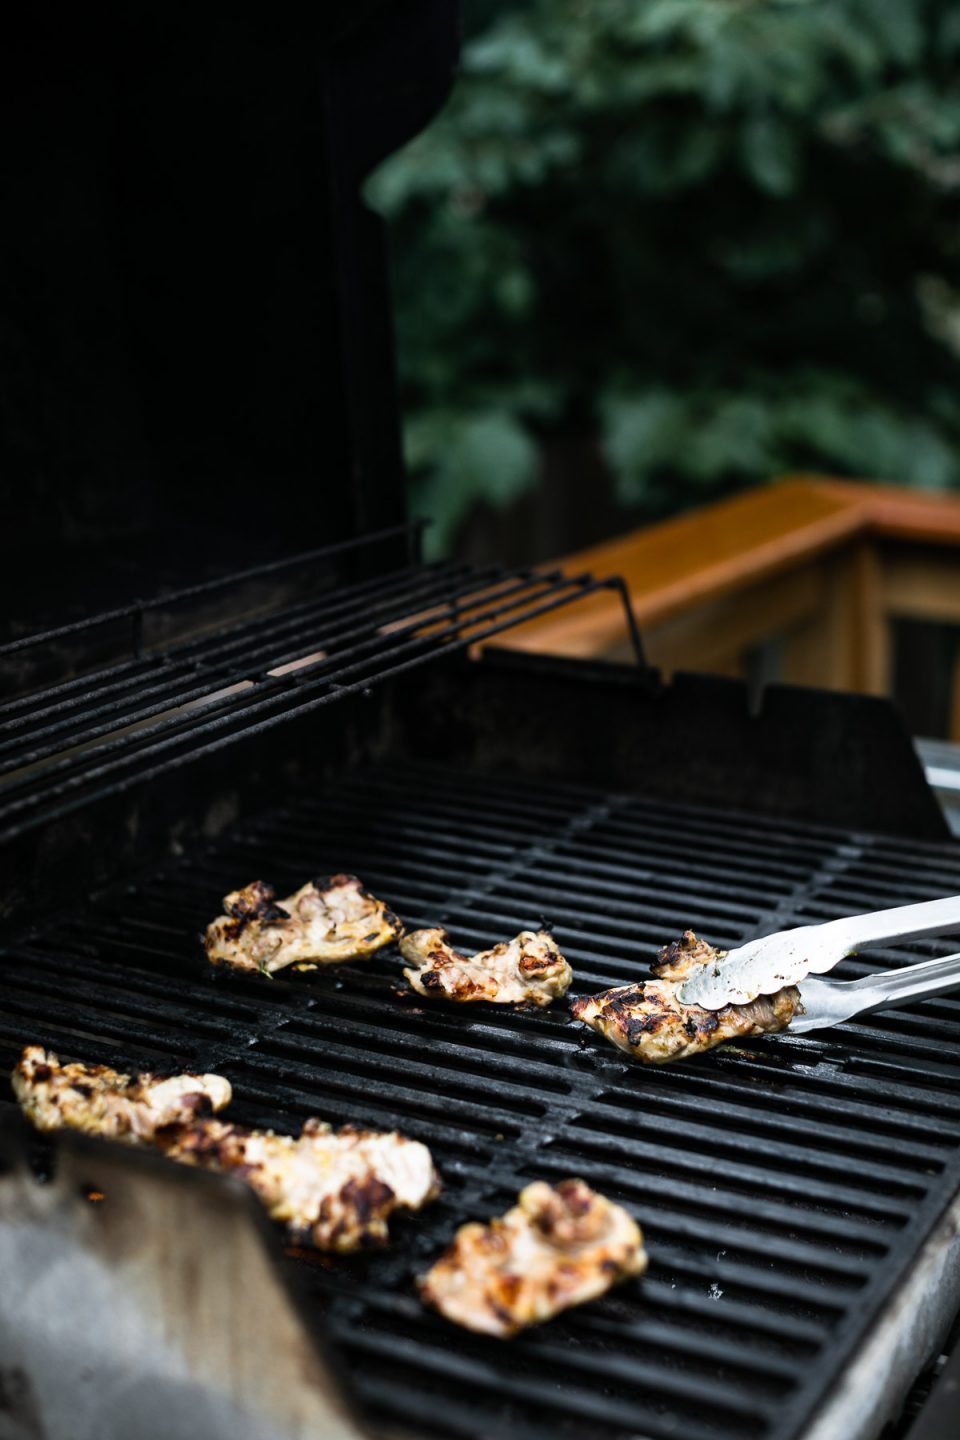 Lemon chicken thighs cooking on the grill. The chicken thighs are directly on grill grates of a gas grill. Tongs poke into the side of the frame, flipping one of the chicken thighs over.